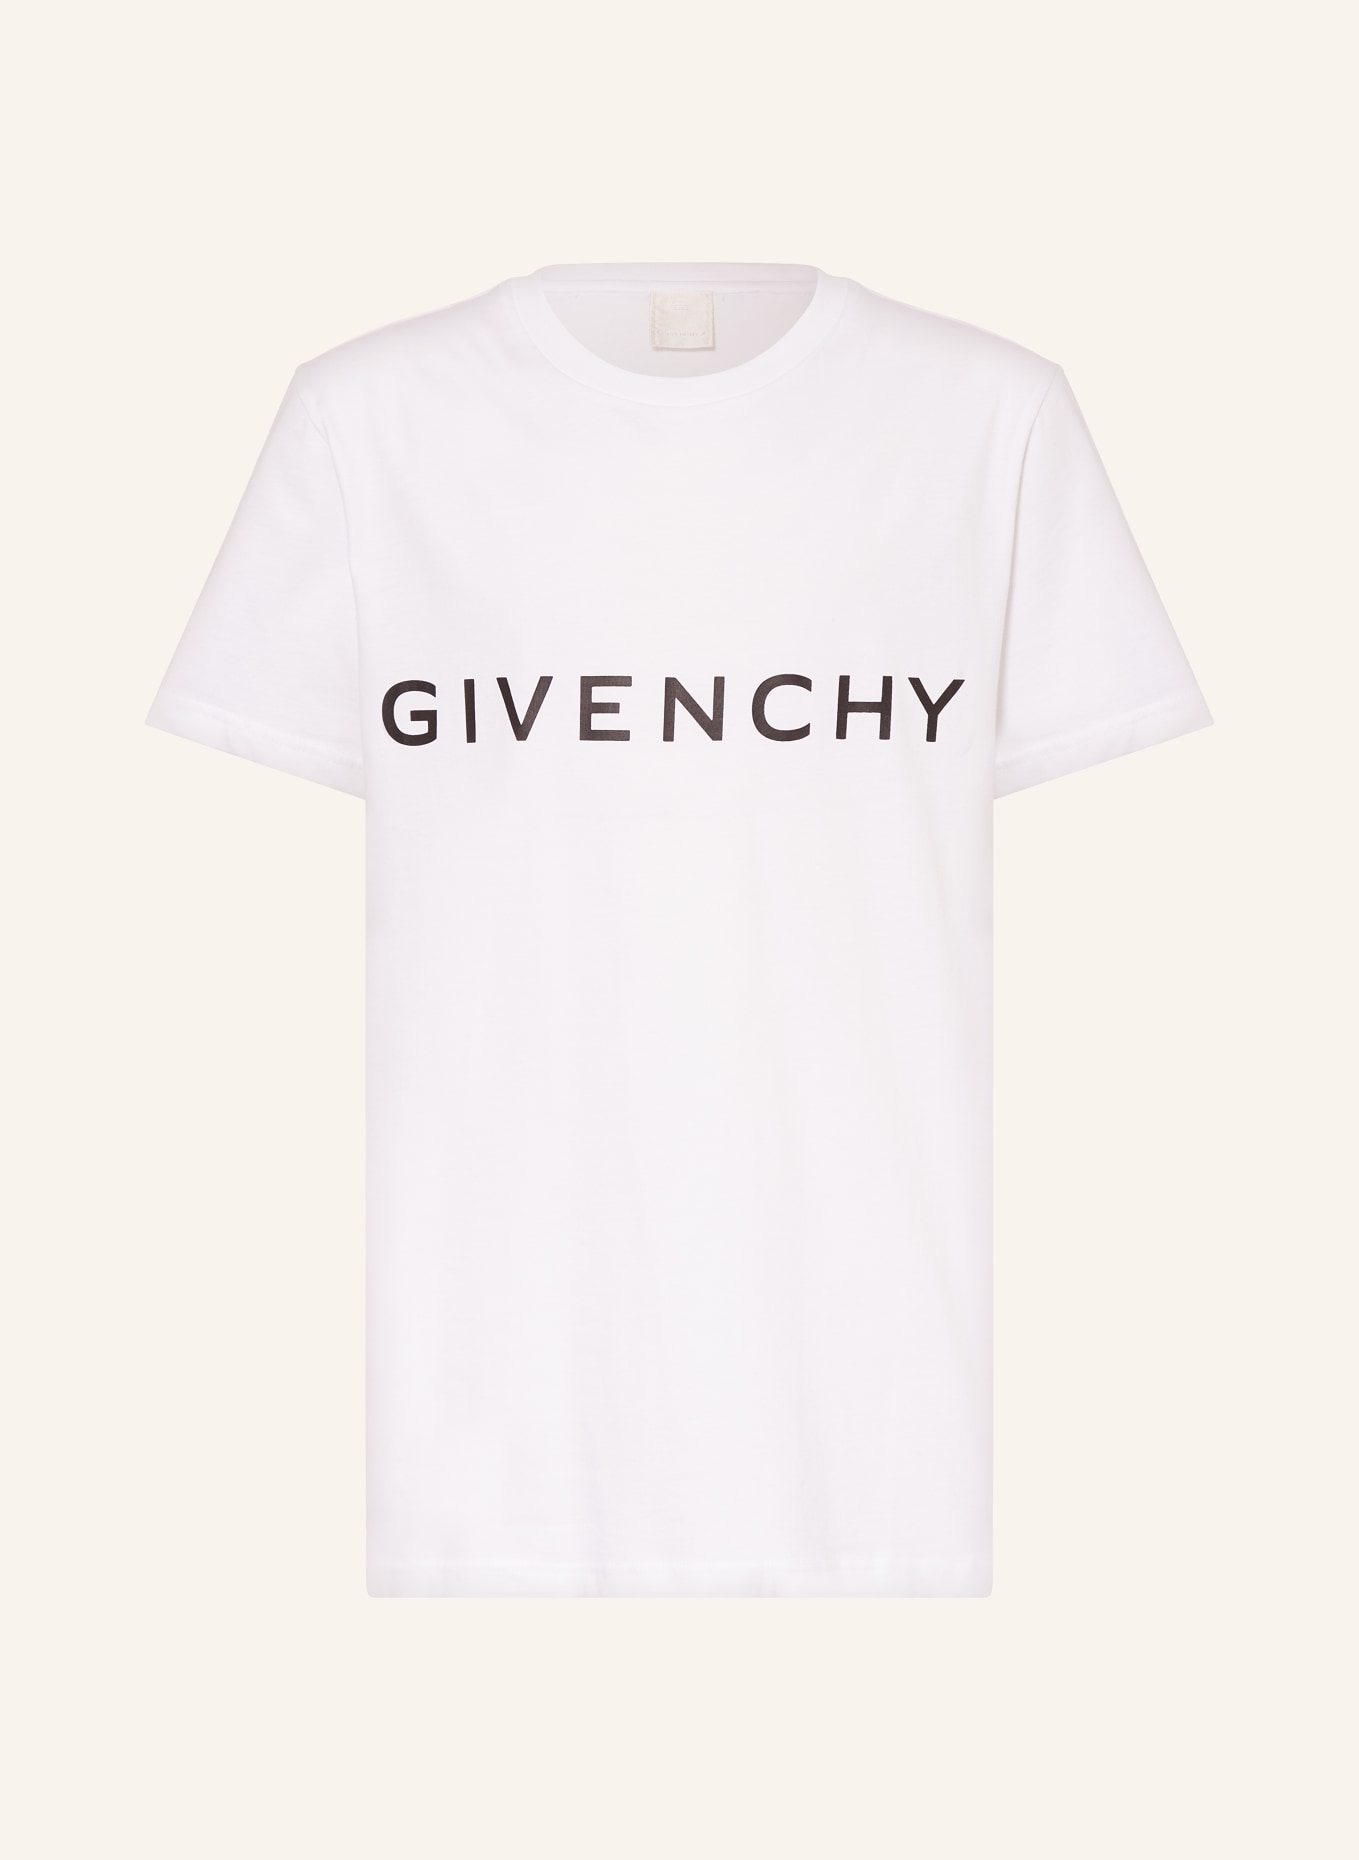 GIVENCHY T-Shirt, Farbe: WEISS (Bild 1)